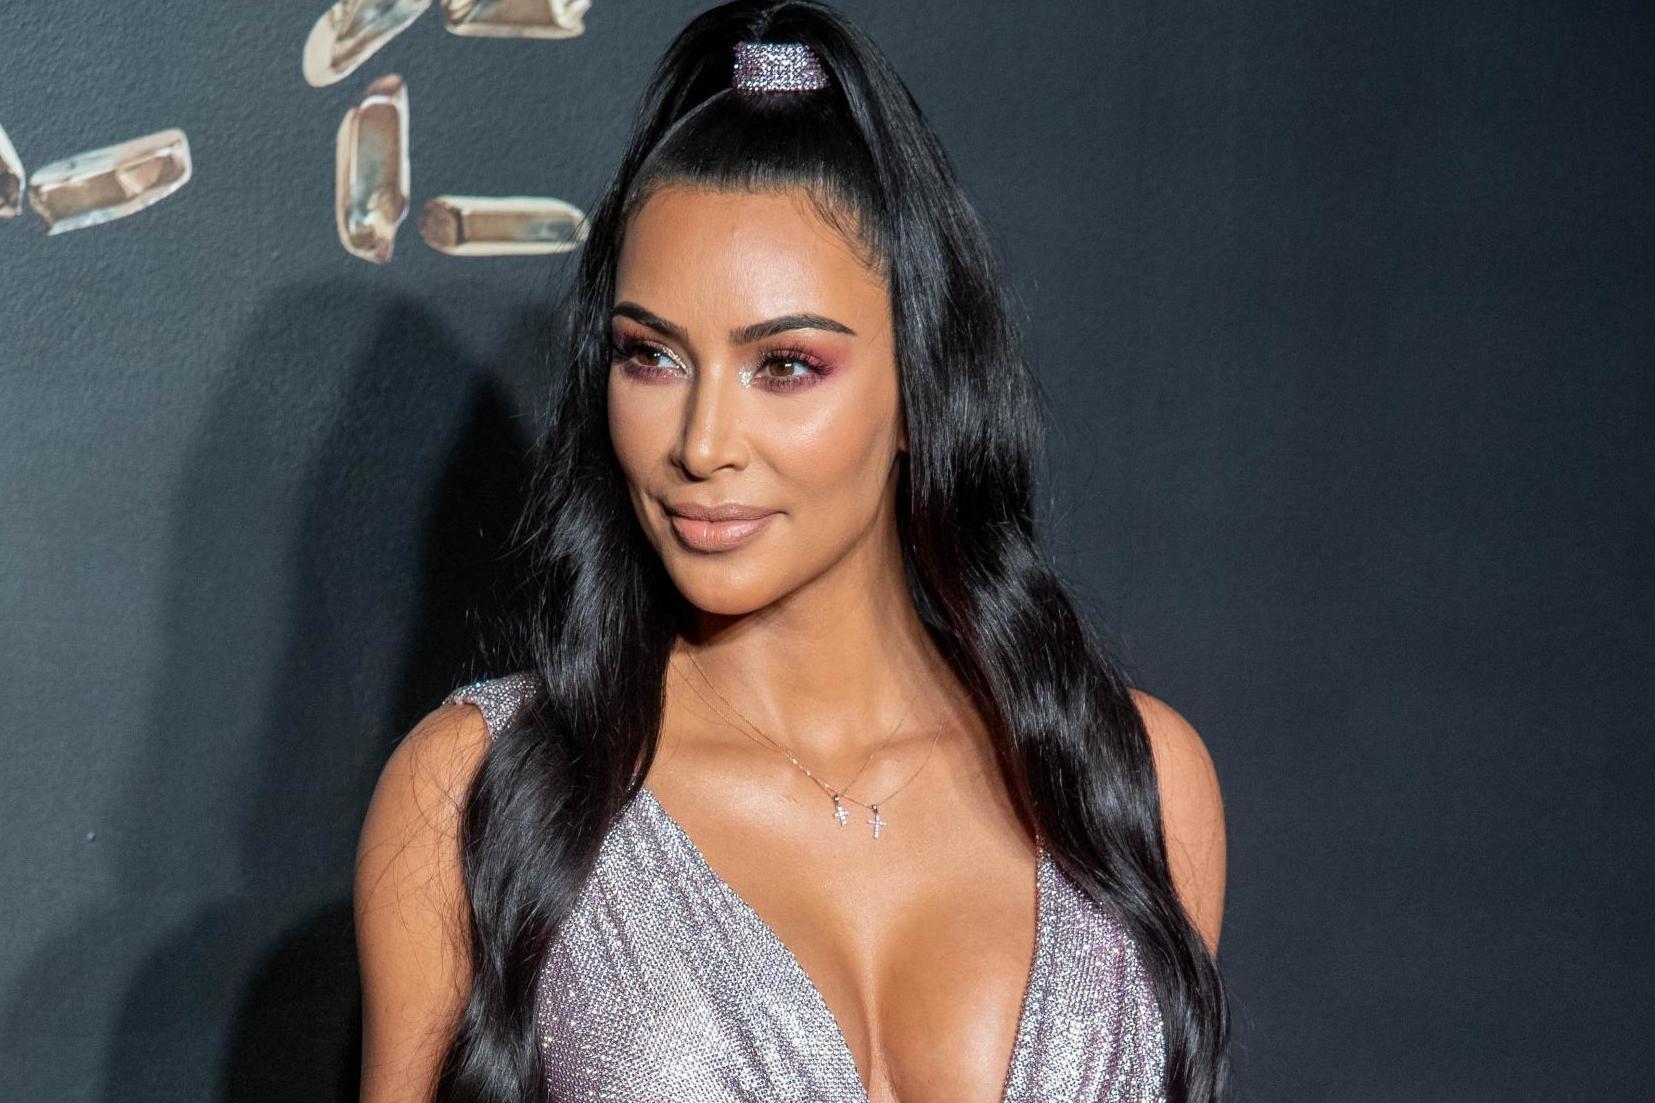 Kim Kardashian reveals she is studying to become a lawyer